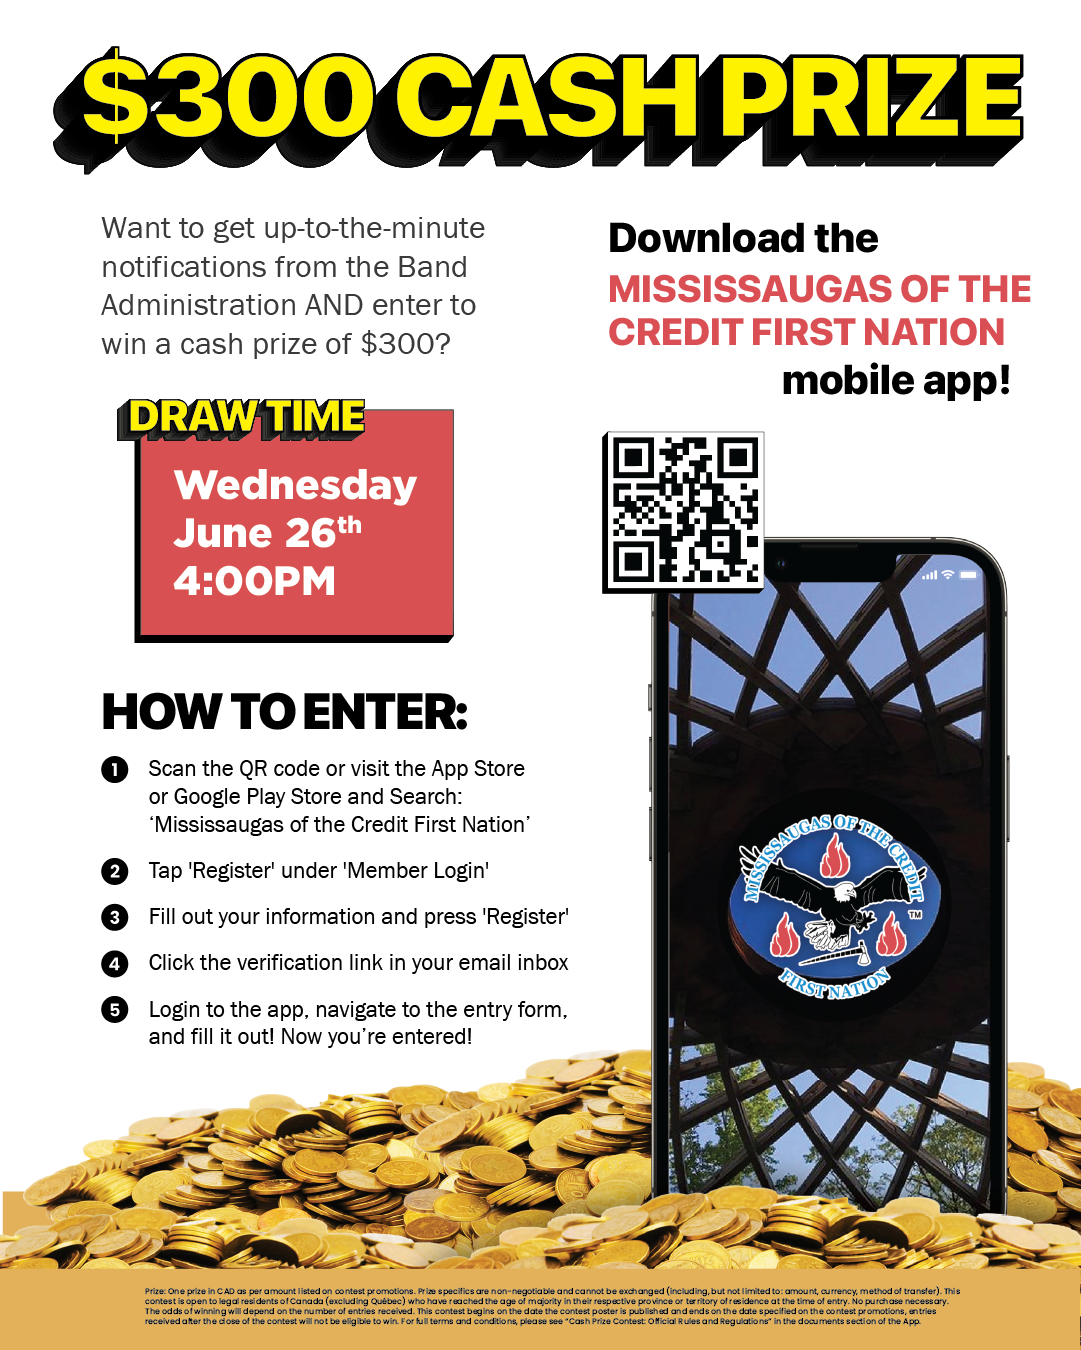 Download the MCFN App for a chance to win $300